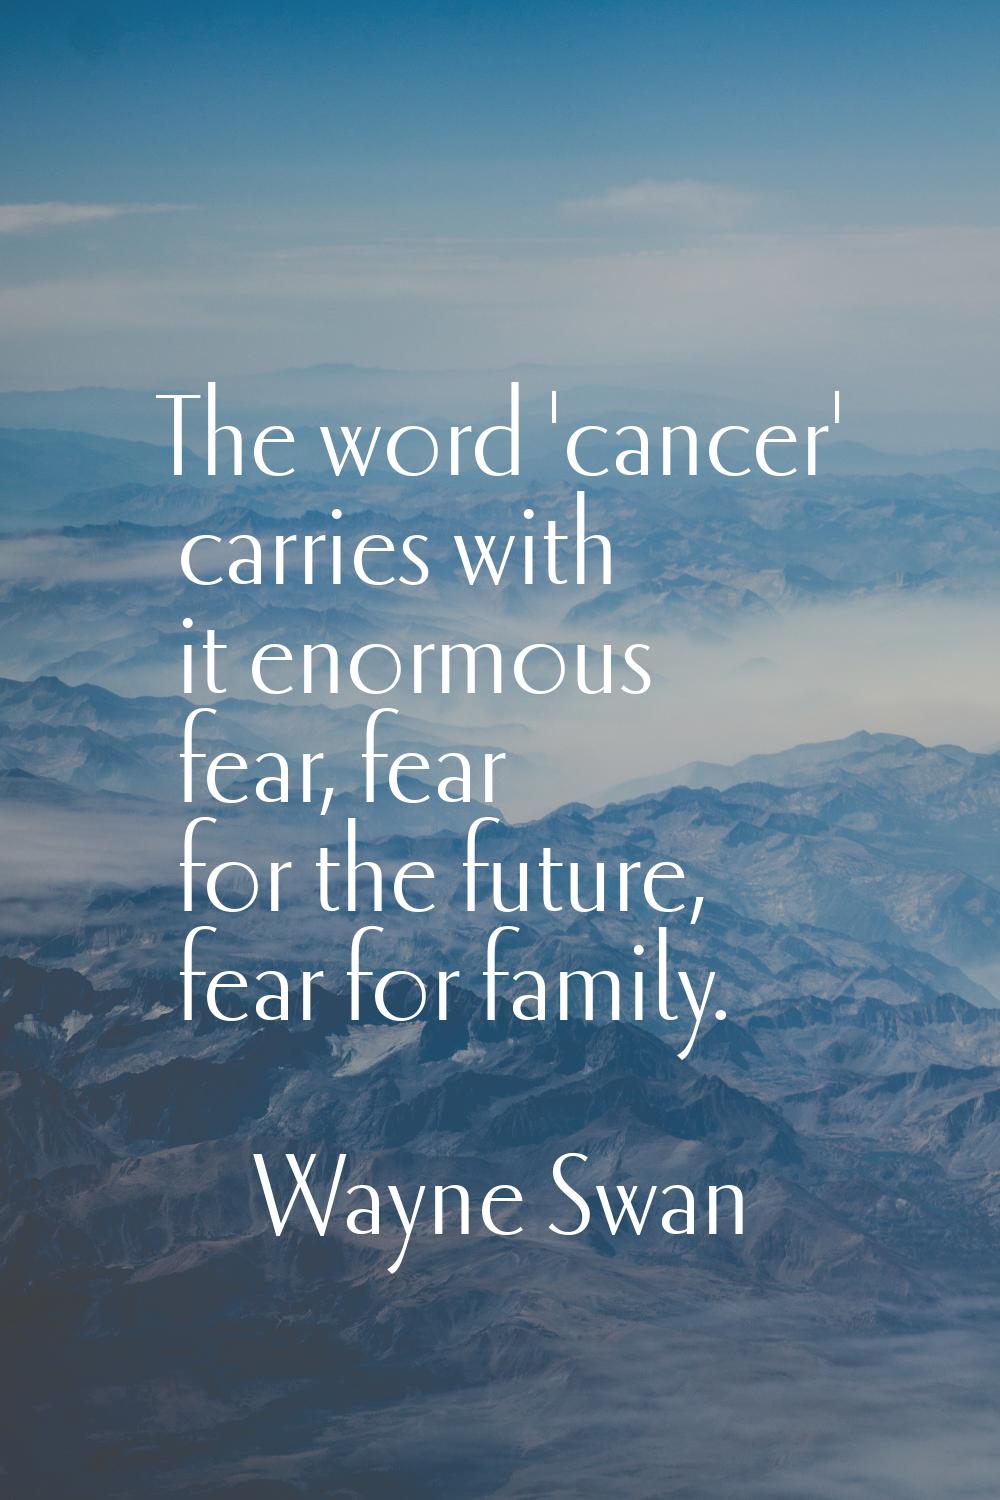 The word 'cancer' carries with it enormous fear, fear for the future, fear for family.